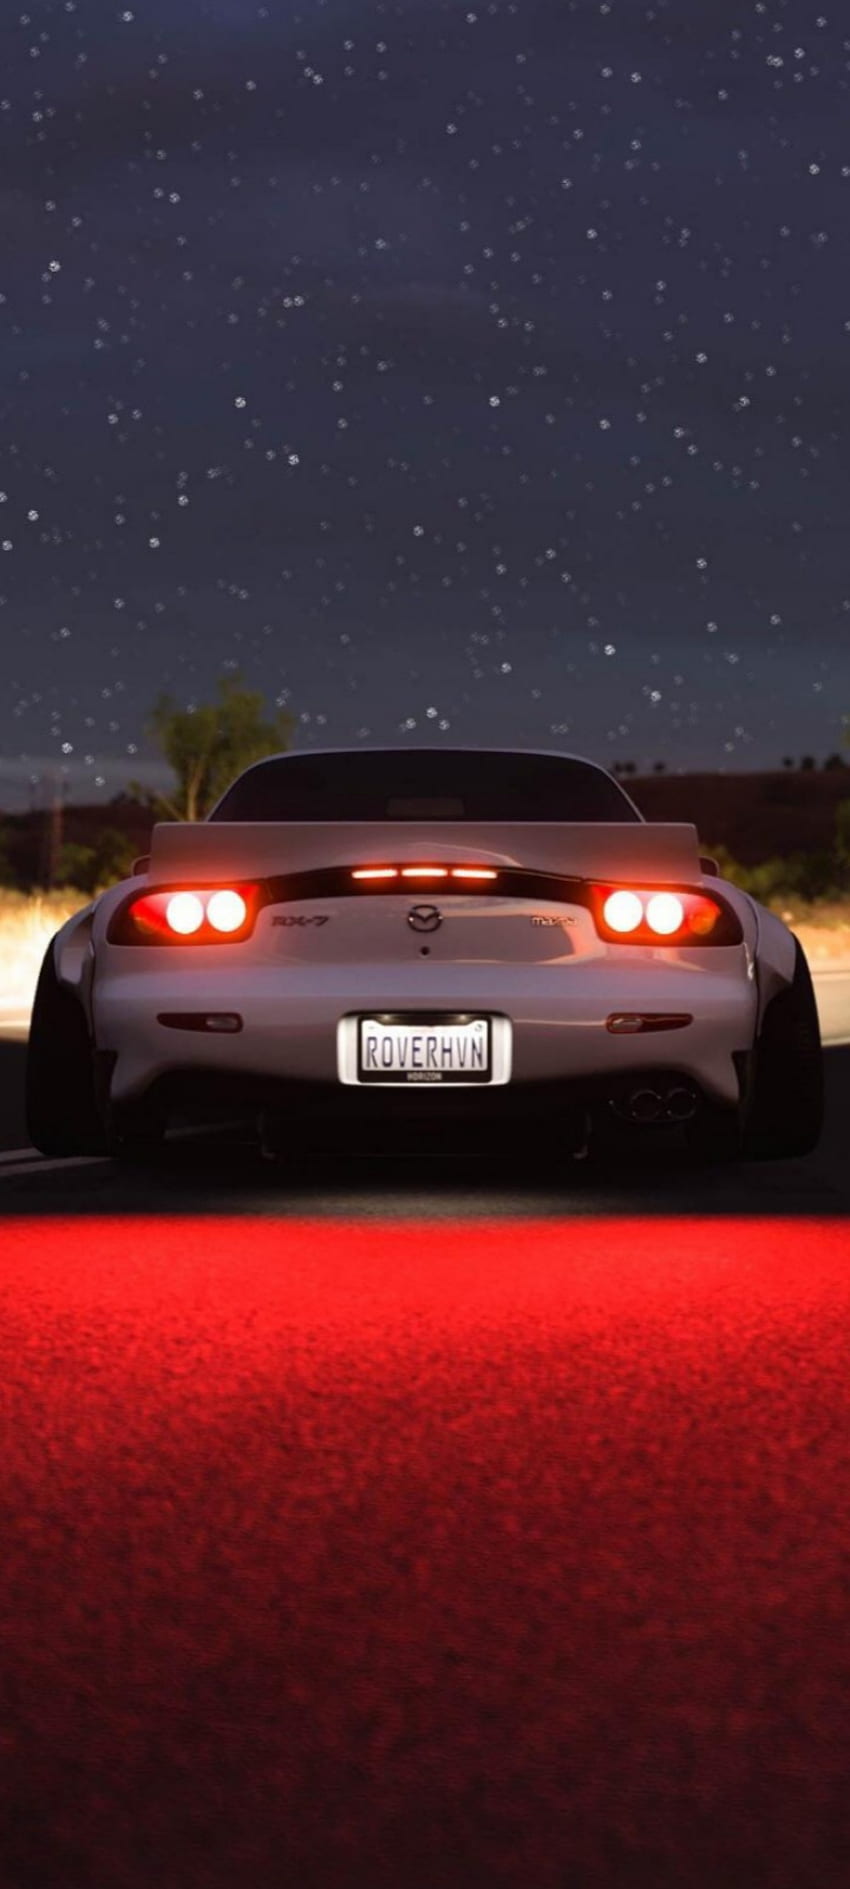 RX-7 with Bodykit, white, car, mazda HD phone wallpaper